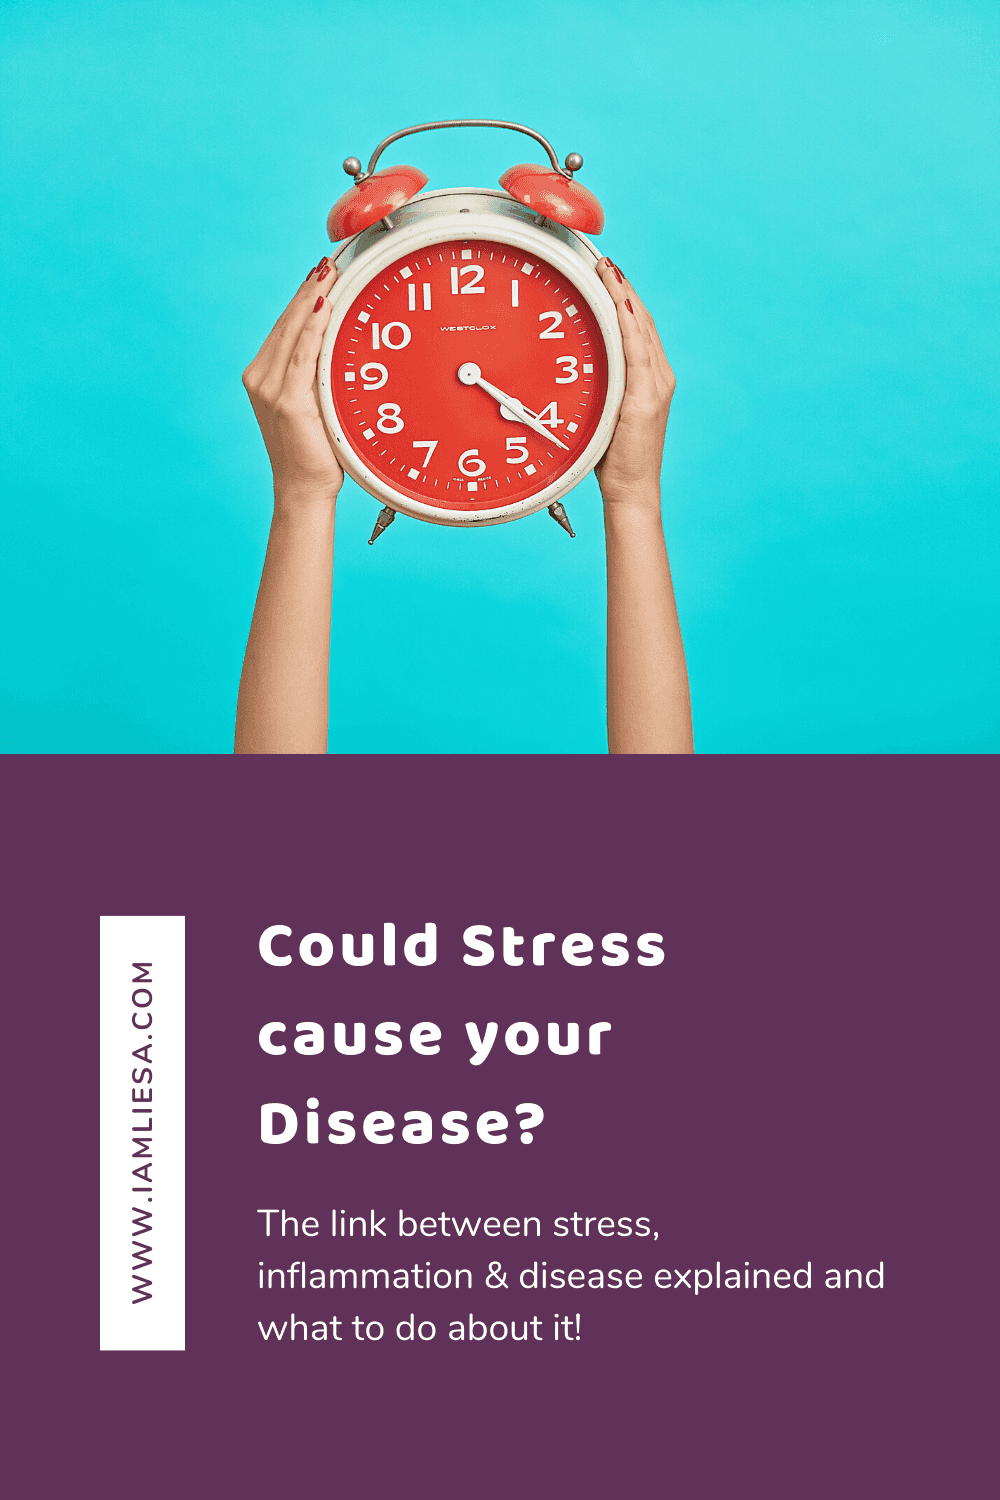 We're all aware that stress isn't good for our health. But did you know just how detrimental it can be? Learn about the link between stress, inflammation & disease and what to do about it!